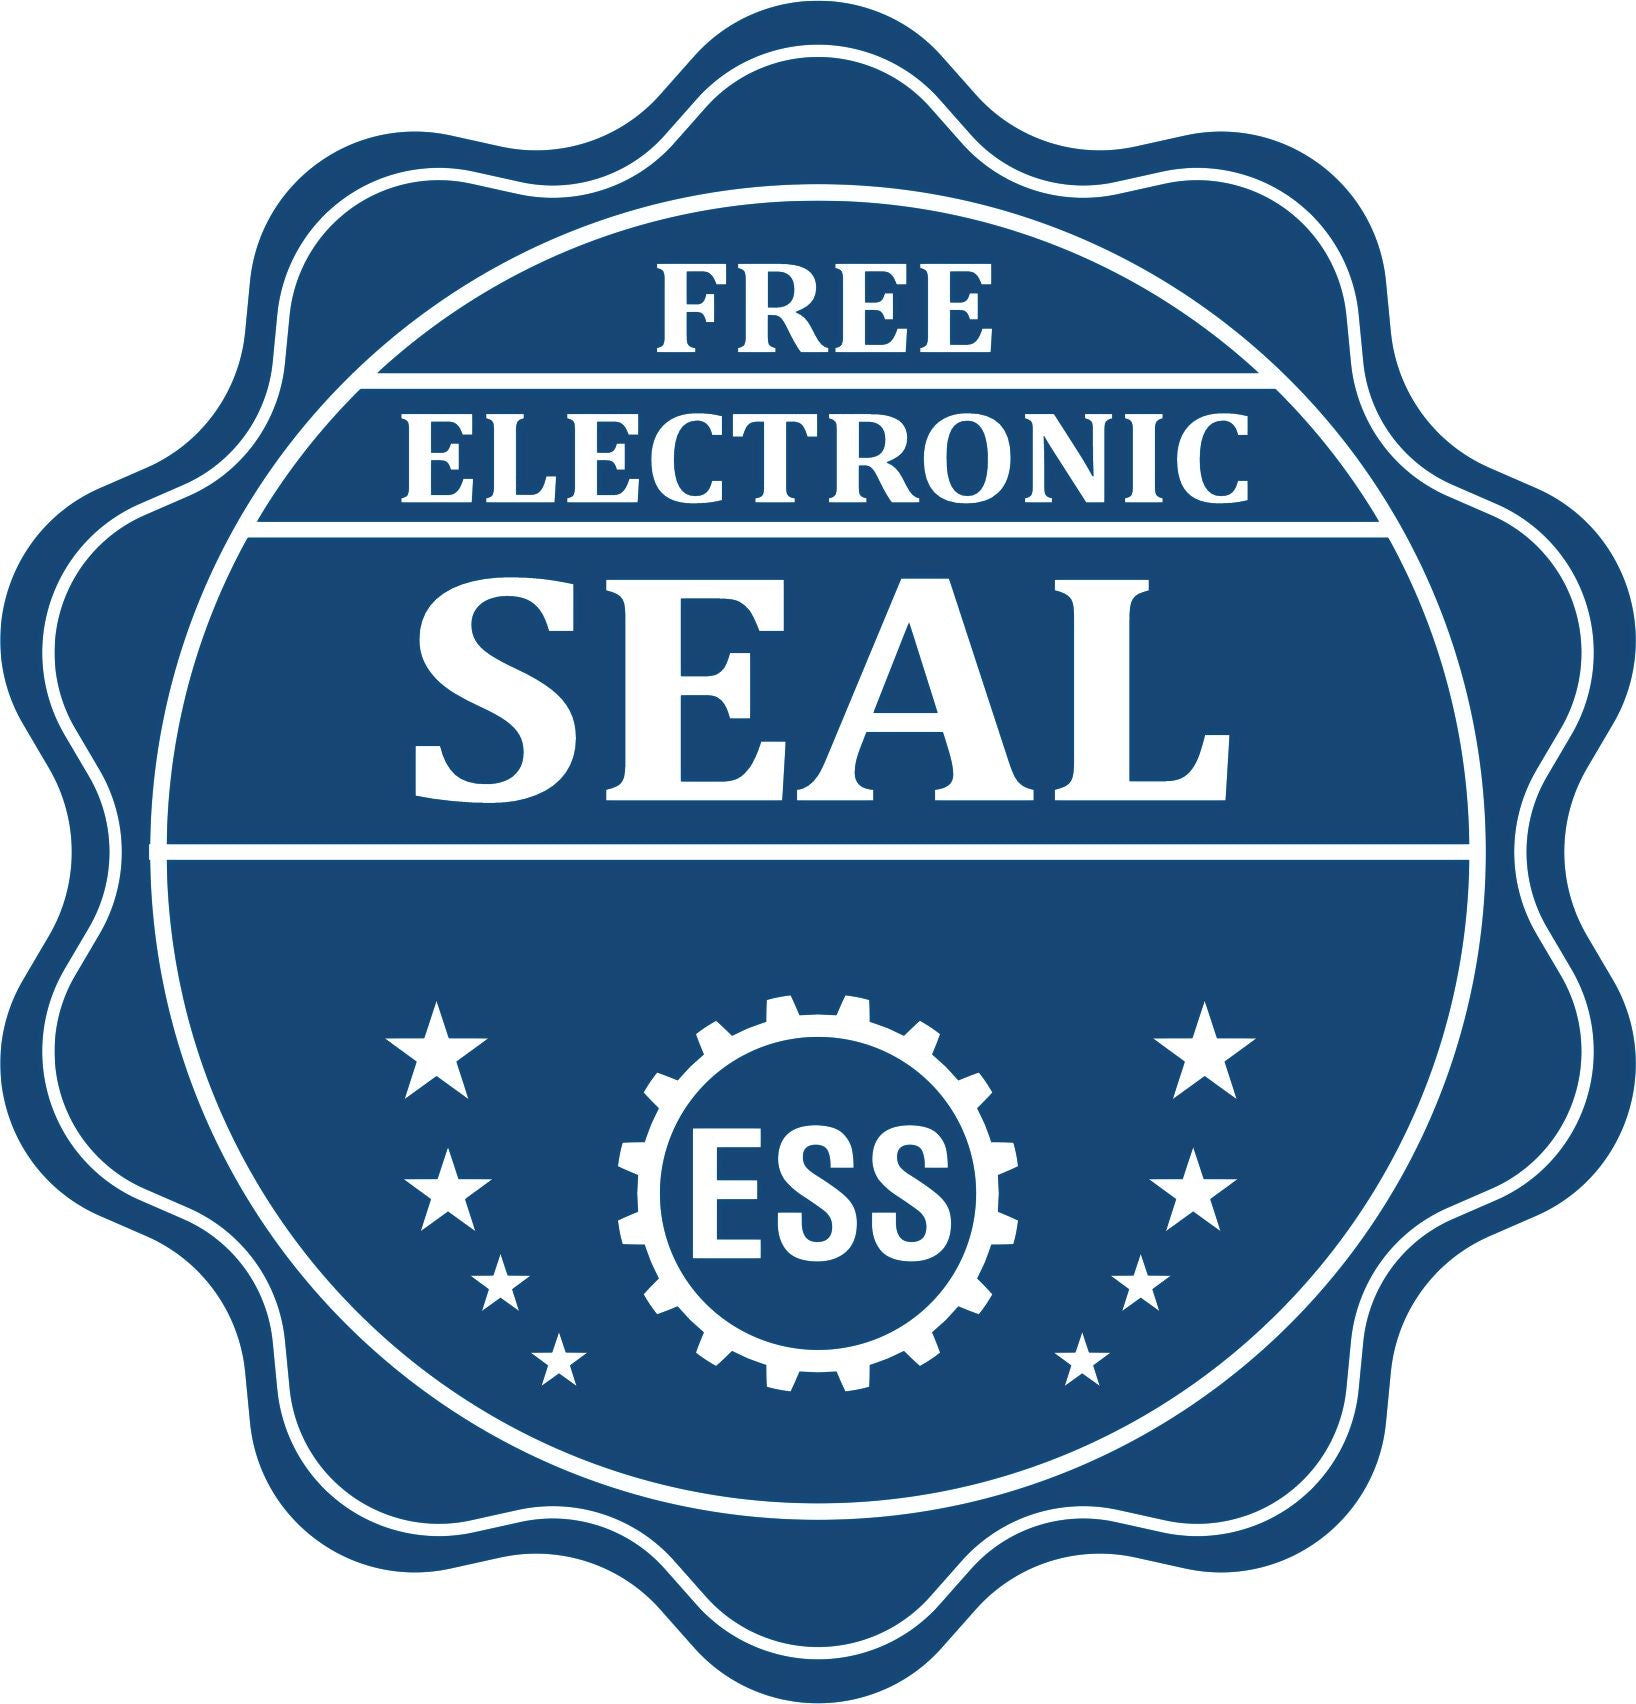 A badge showing a free electronic seal for the State of Connecticut Extended Long Reach Landscape Architect Seal Embosser with stars and the ESS gear on the emblem.